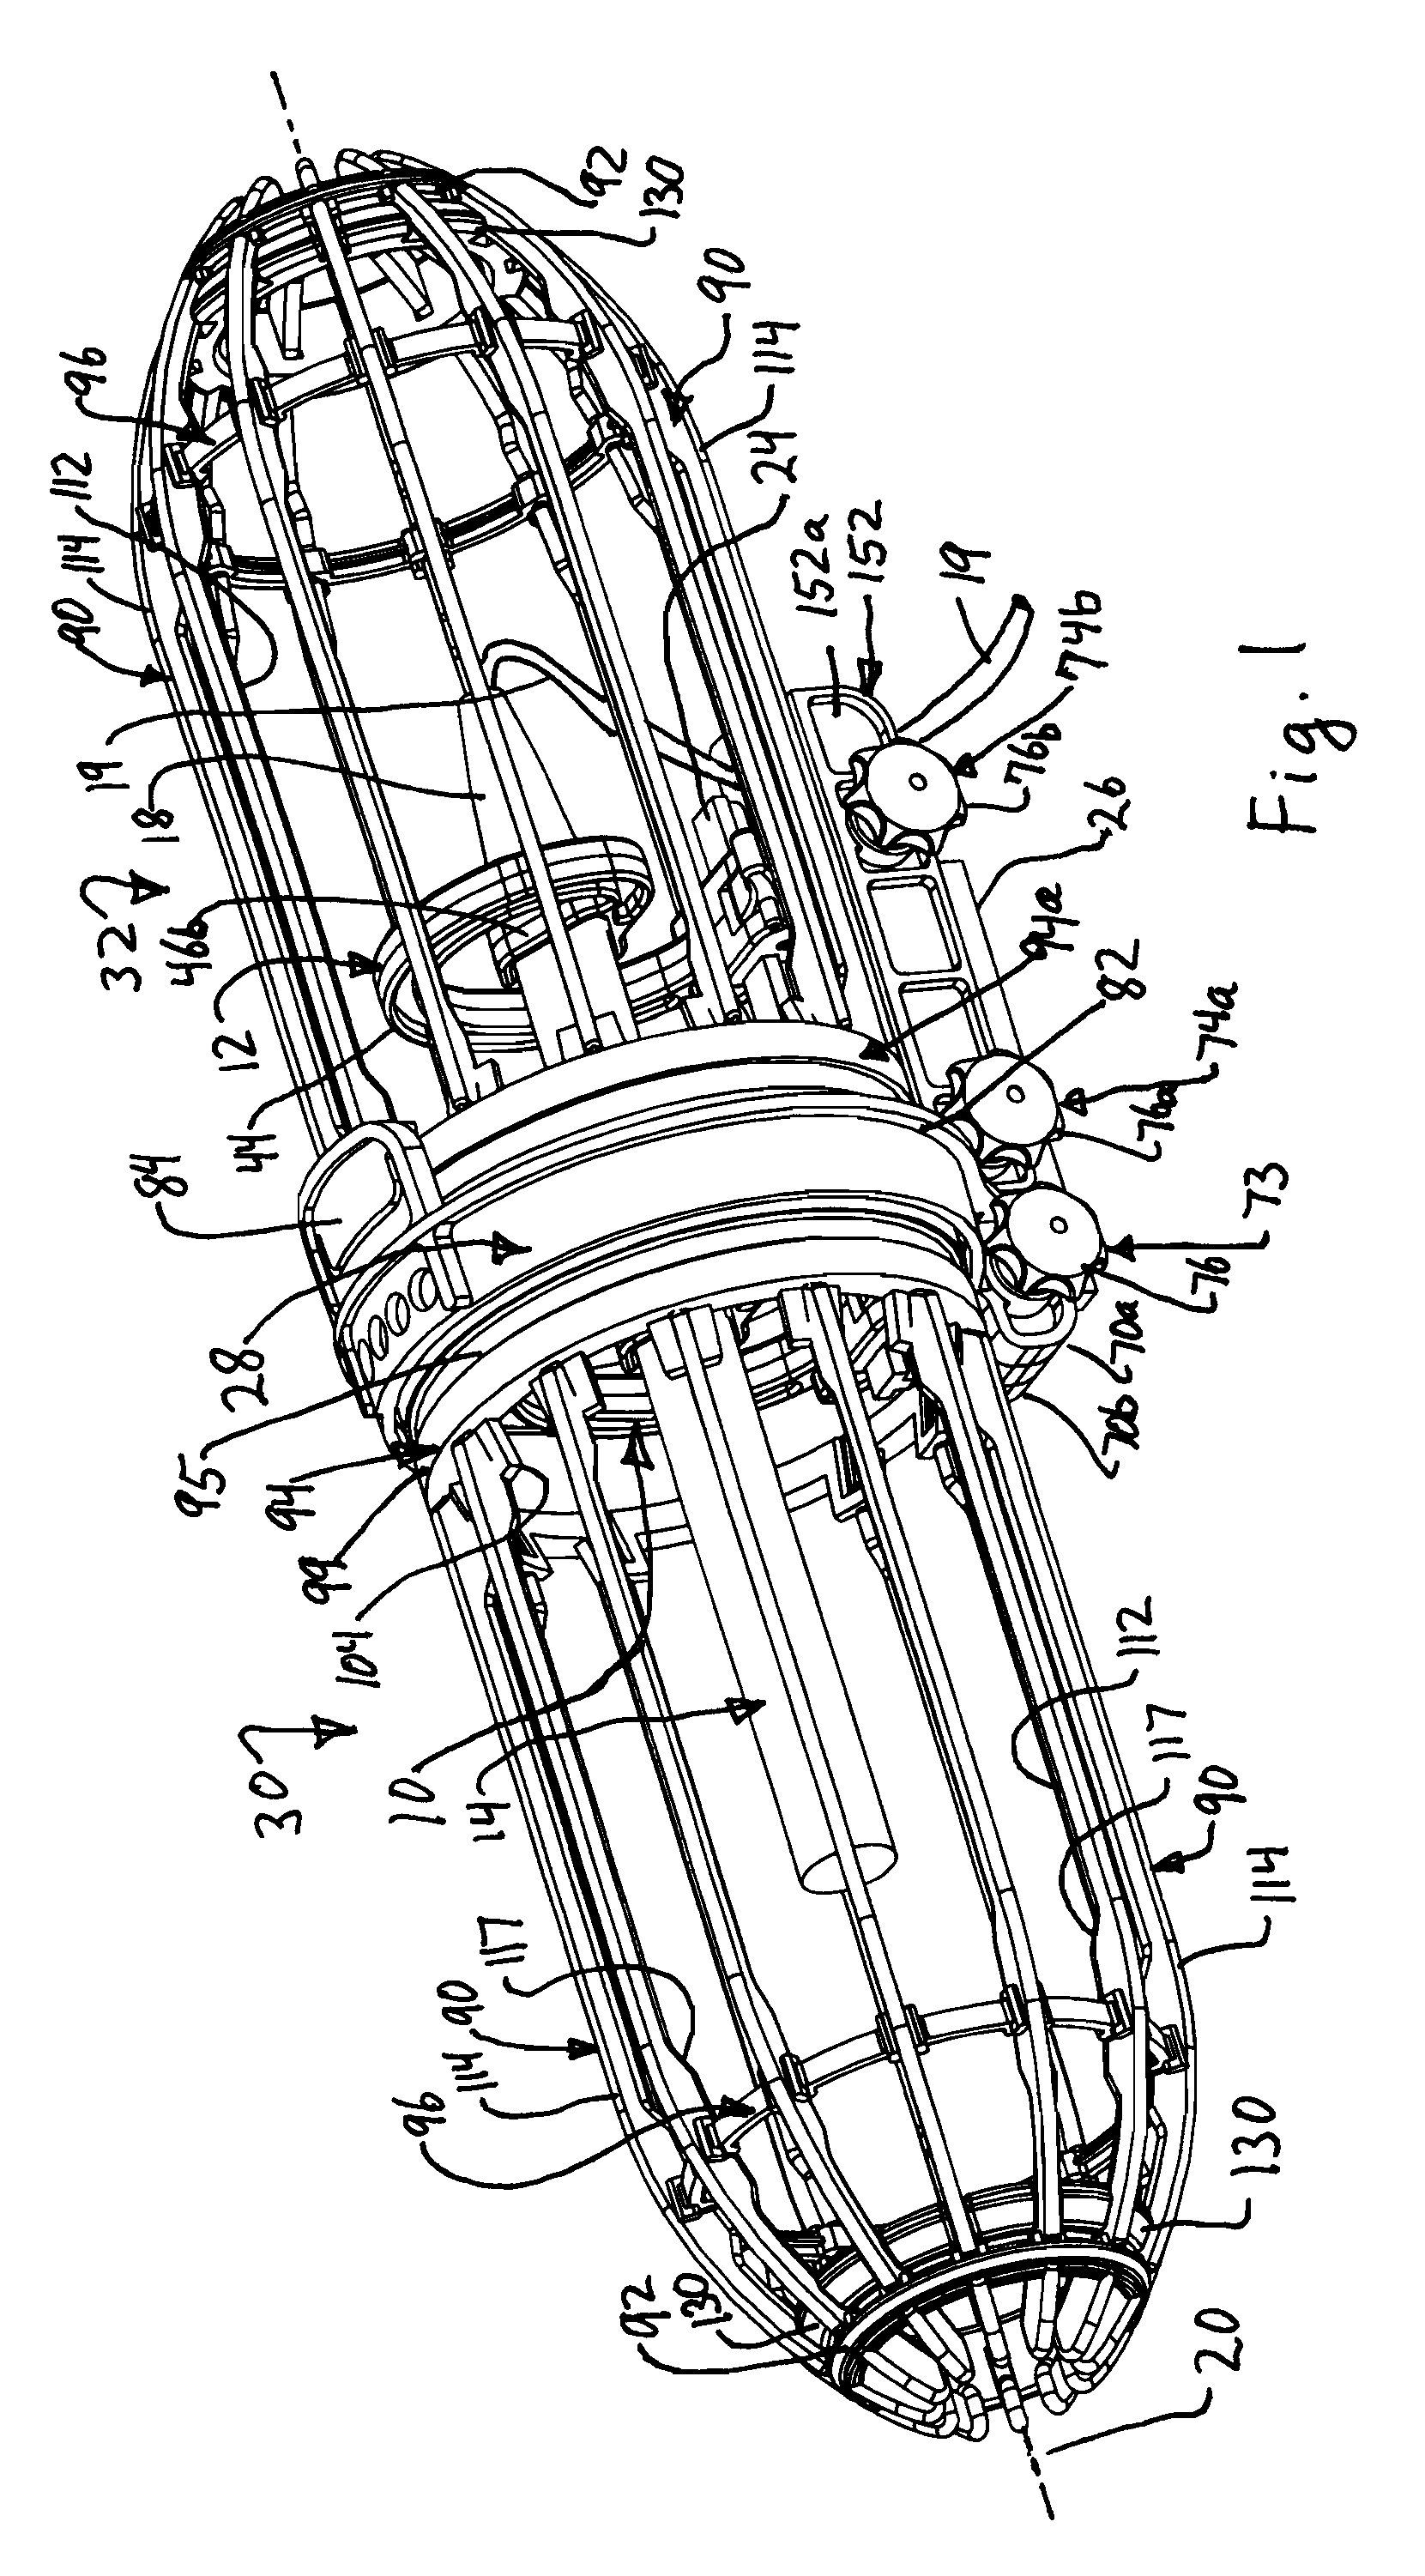 Microphone mounting method and apparatus